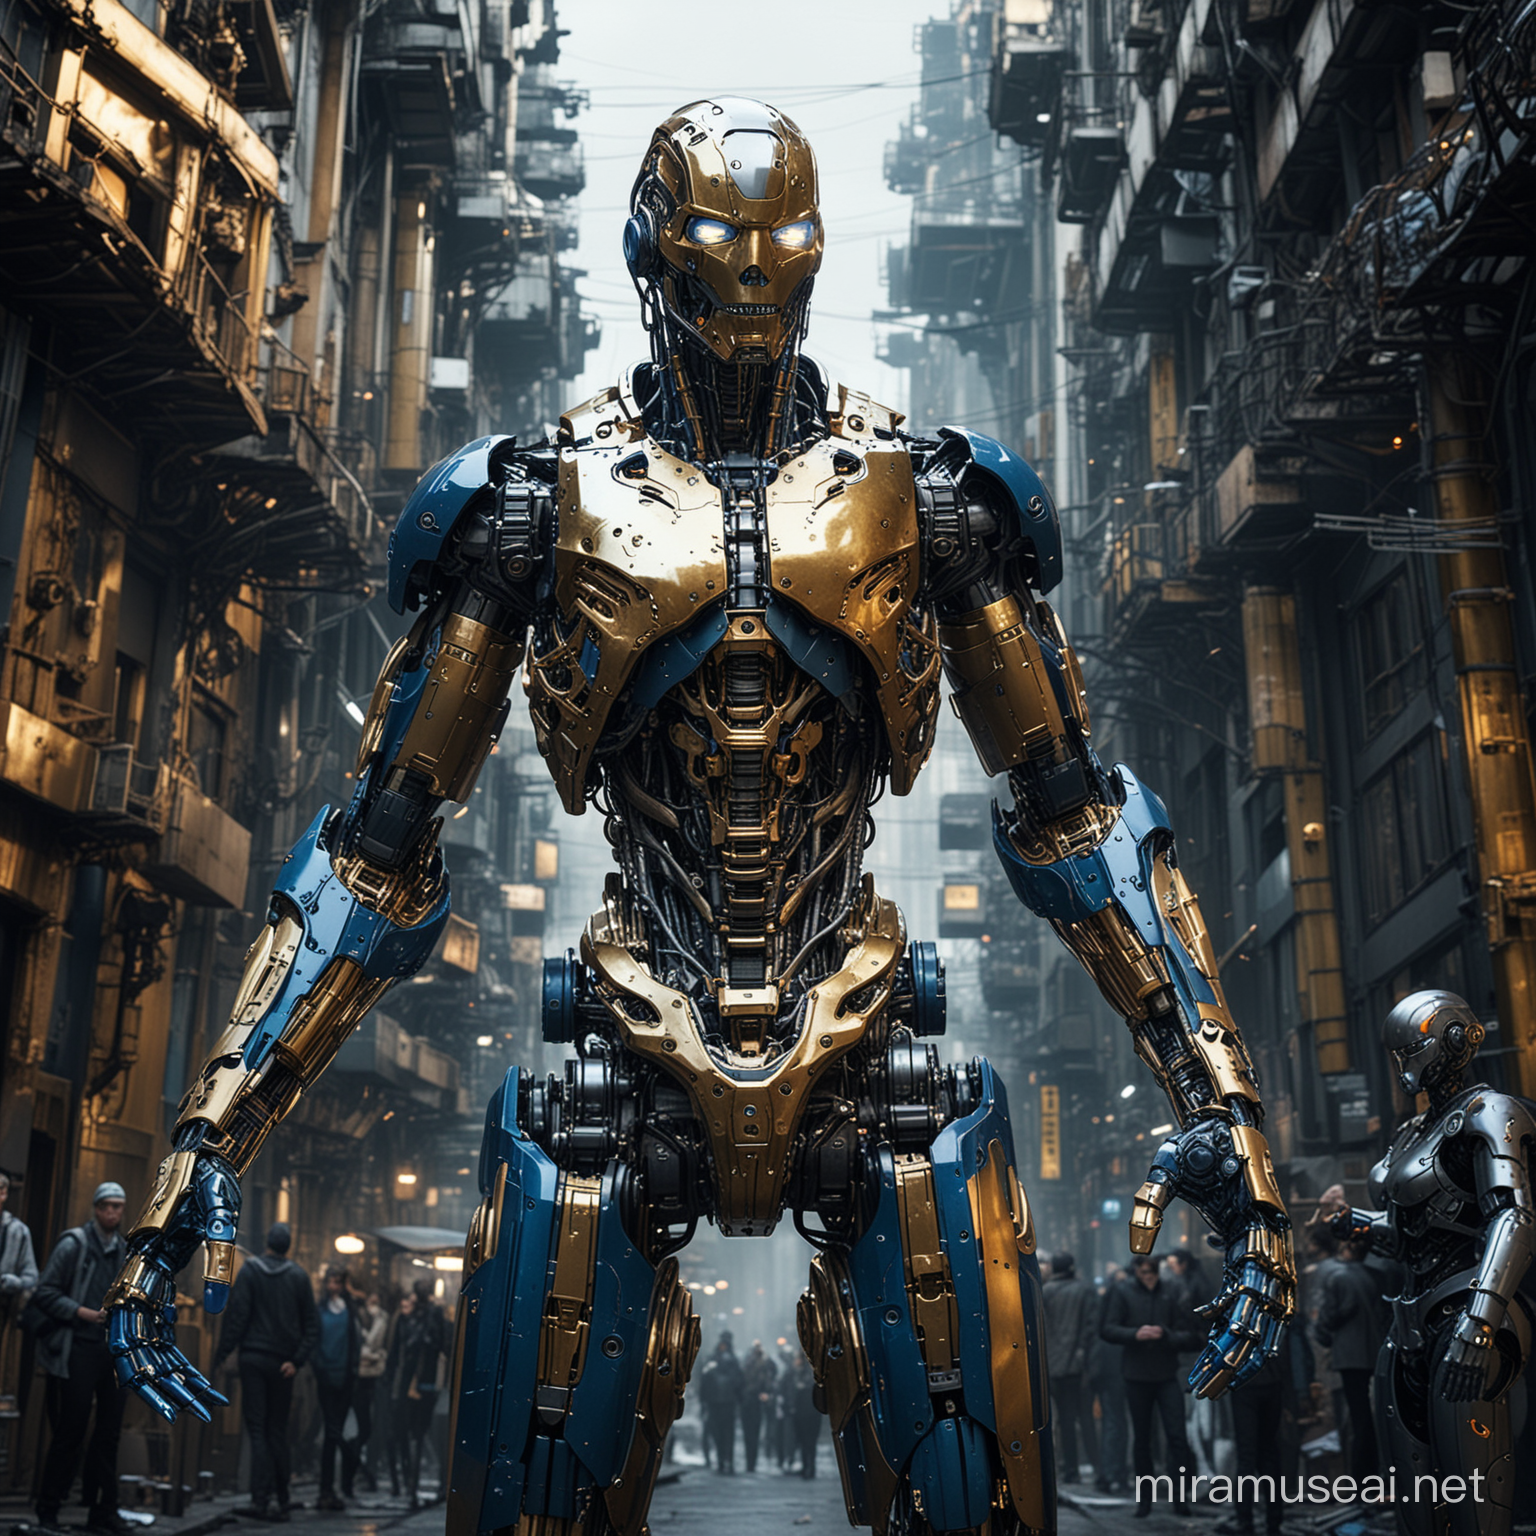 Dominant Gold and Dark Blue Cyborg in Street Photography Style